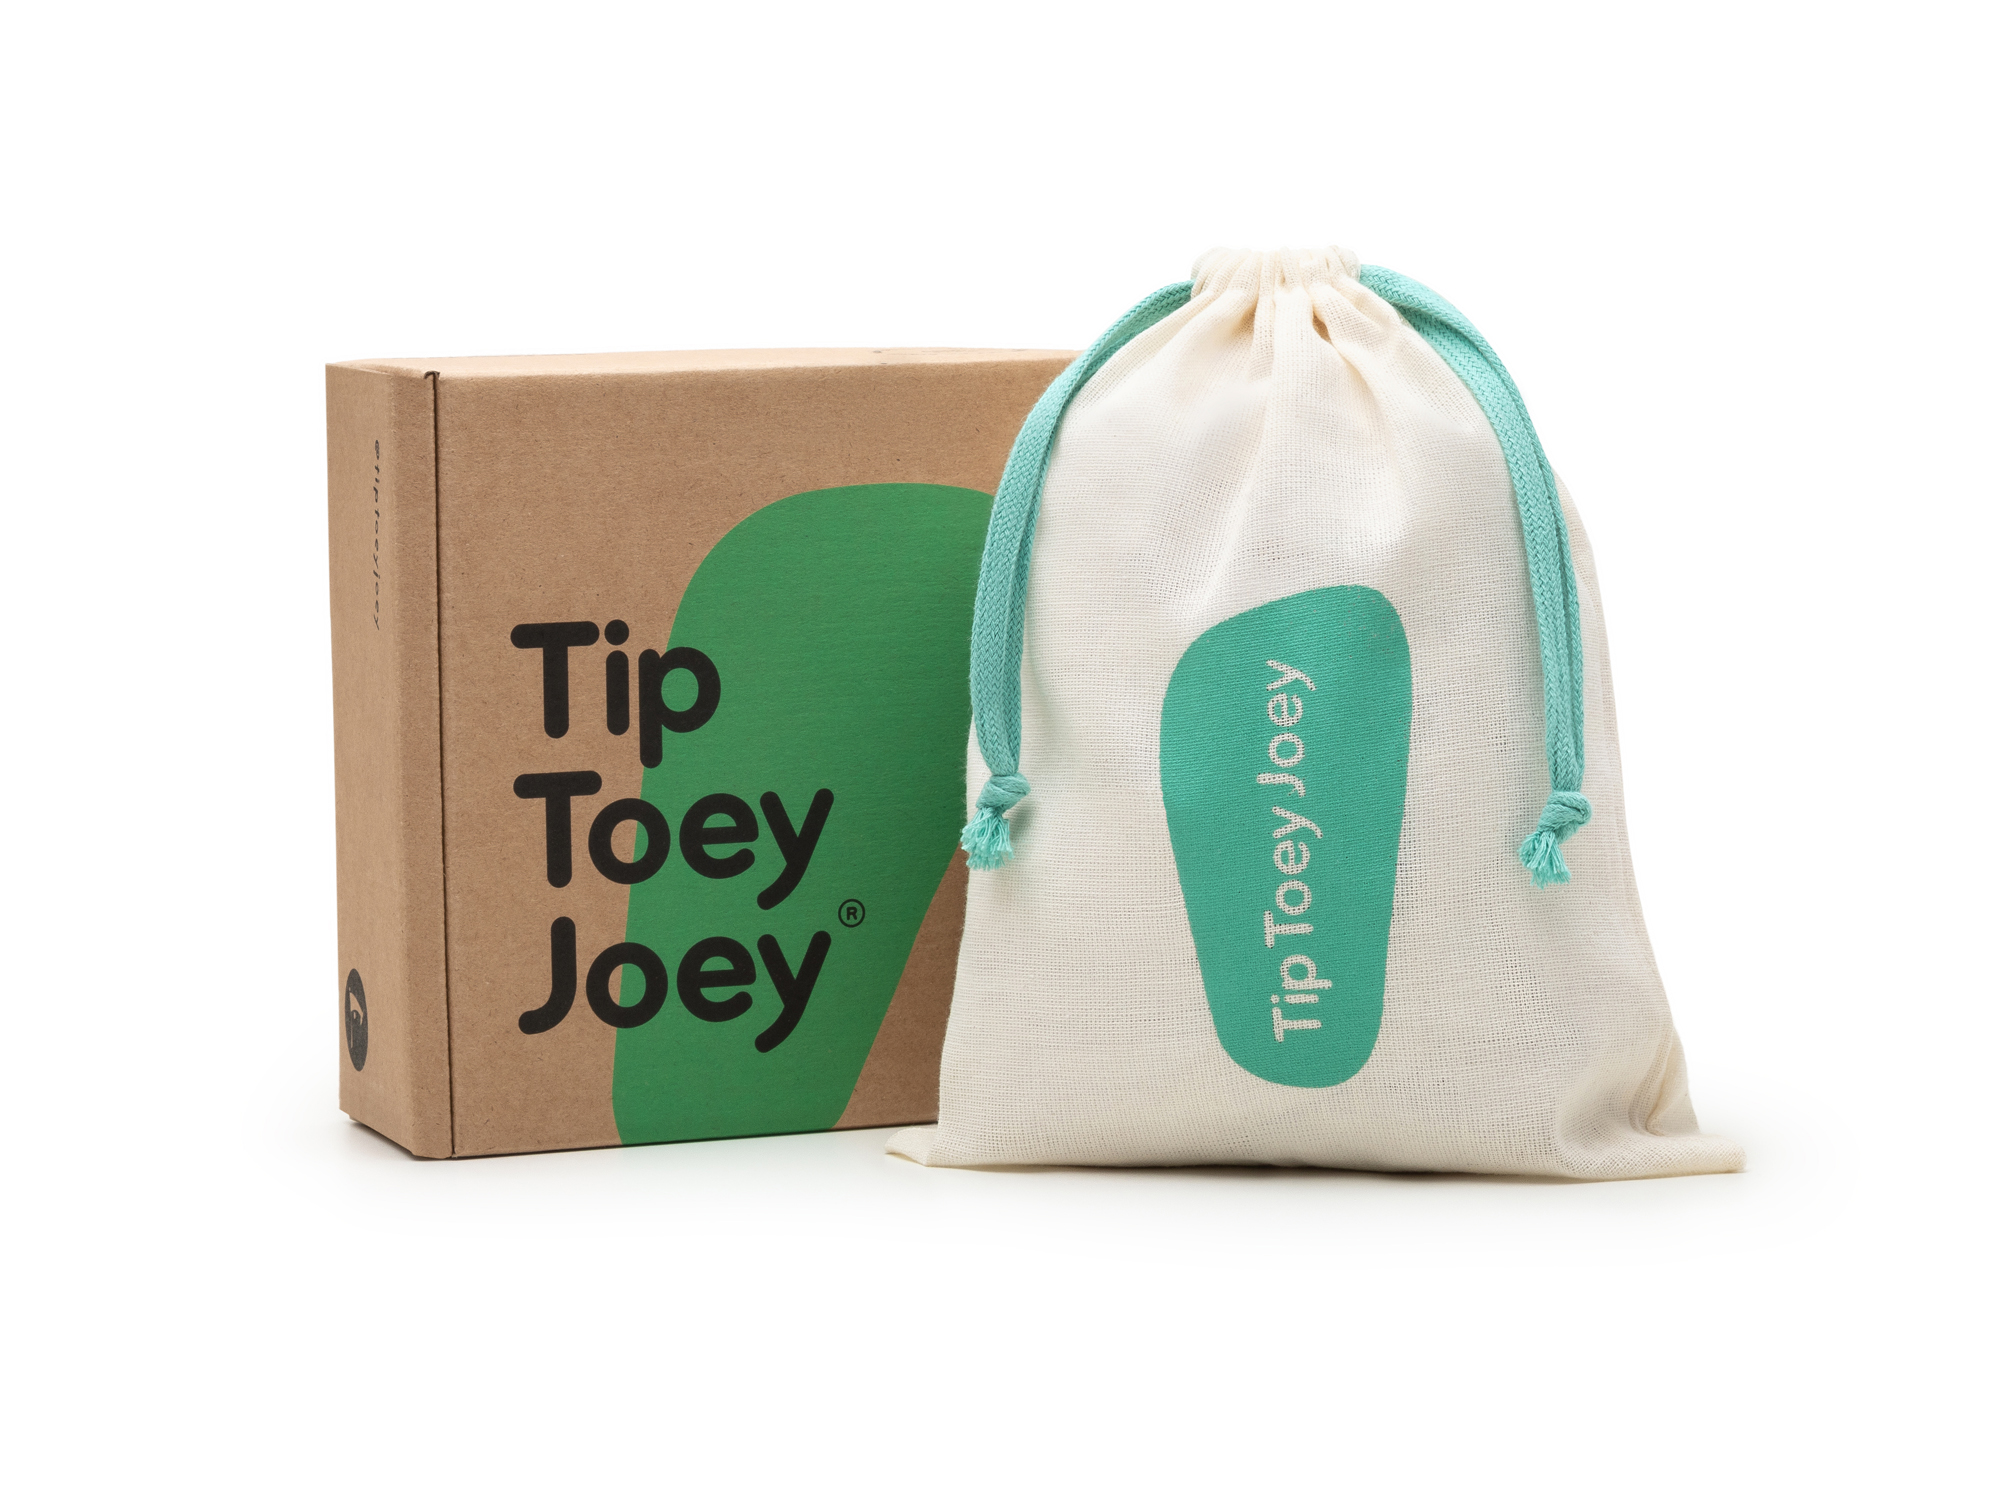 UP & GO Sneakers for Boys Alley | Tip Toey Joey - Australia - 5